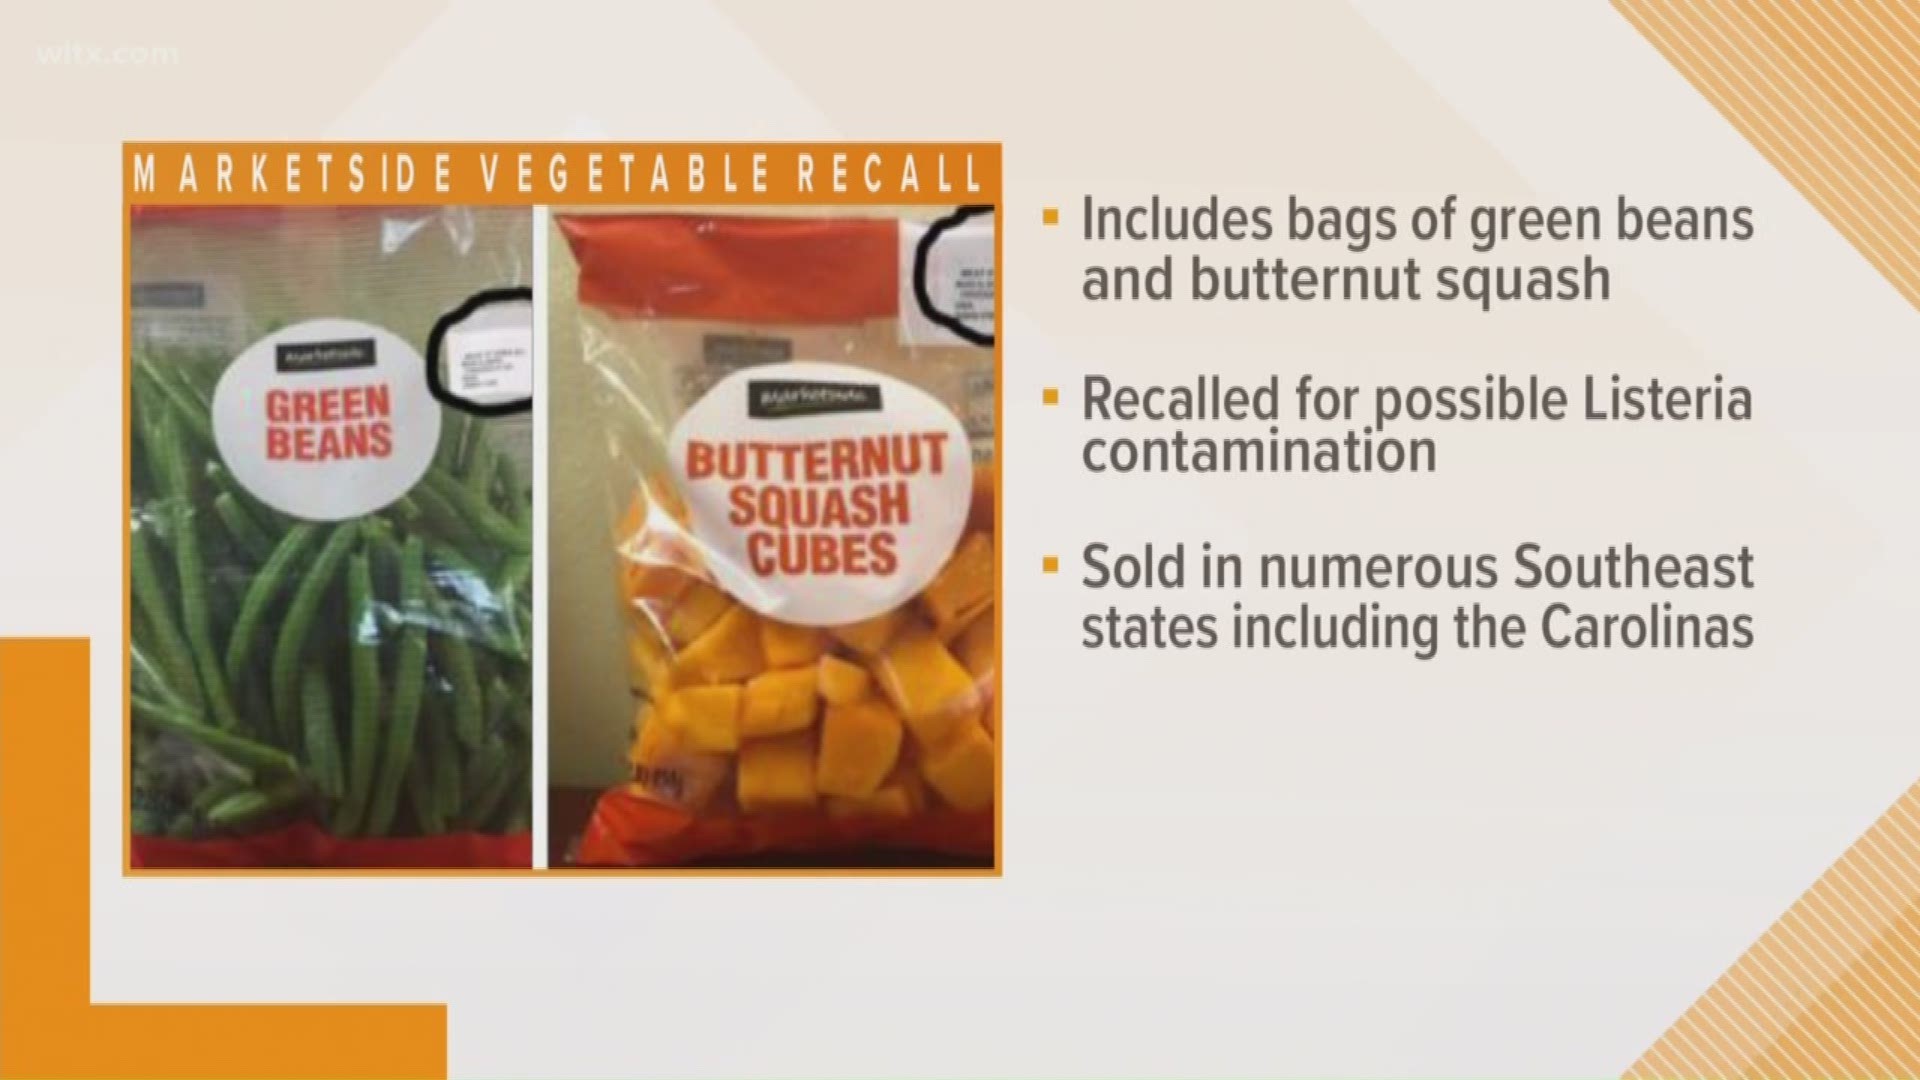 Marketside brand green beans and butternut squash have been voluntarily recalled due to a possible listeria contamination.